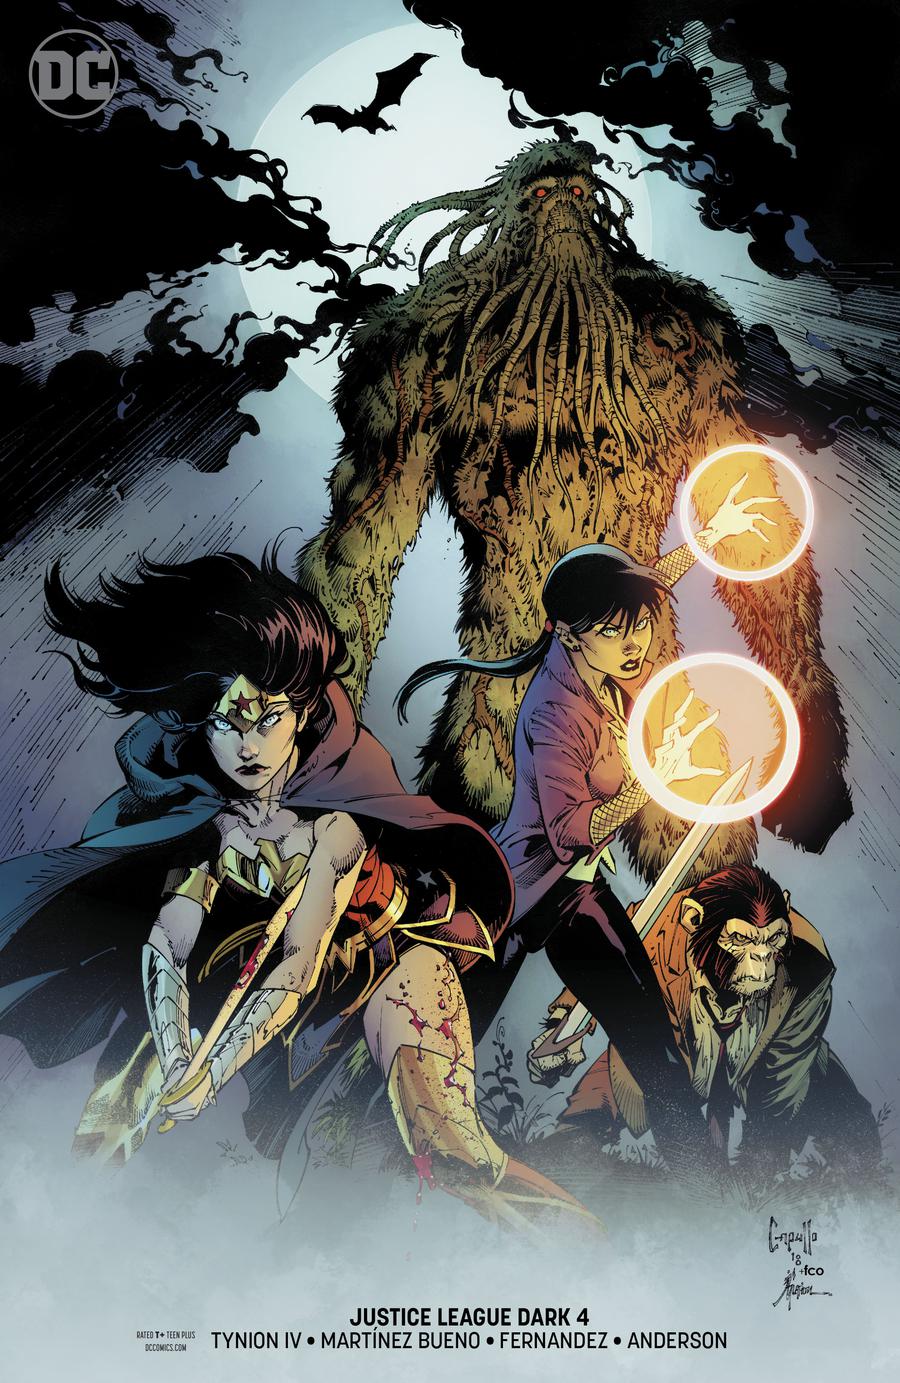 Justice League Dark Vol 2 #4 Cover B Variant Greg Capullo & Jonathan Glapion Cover (Witching Hour Part 3)